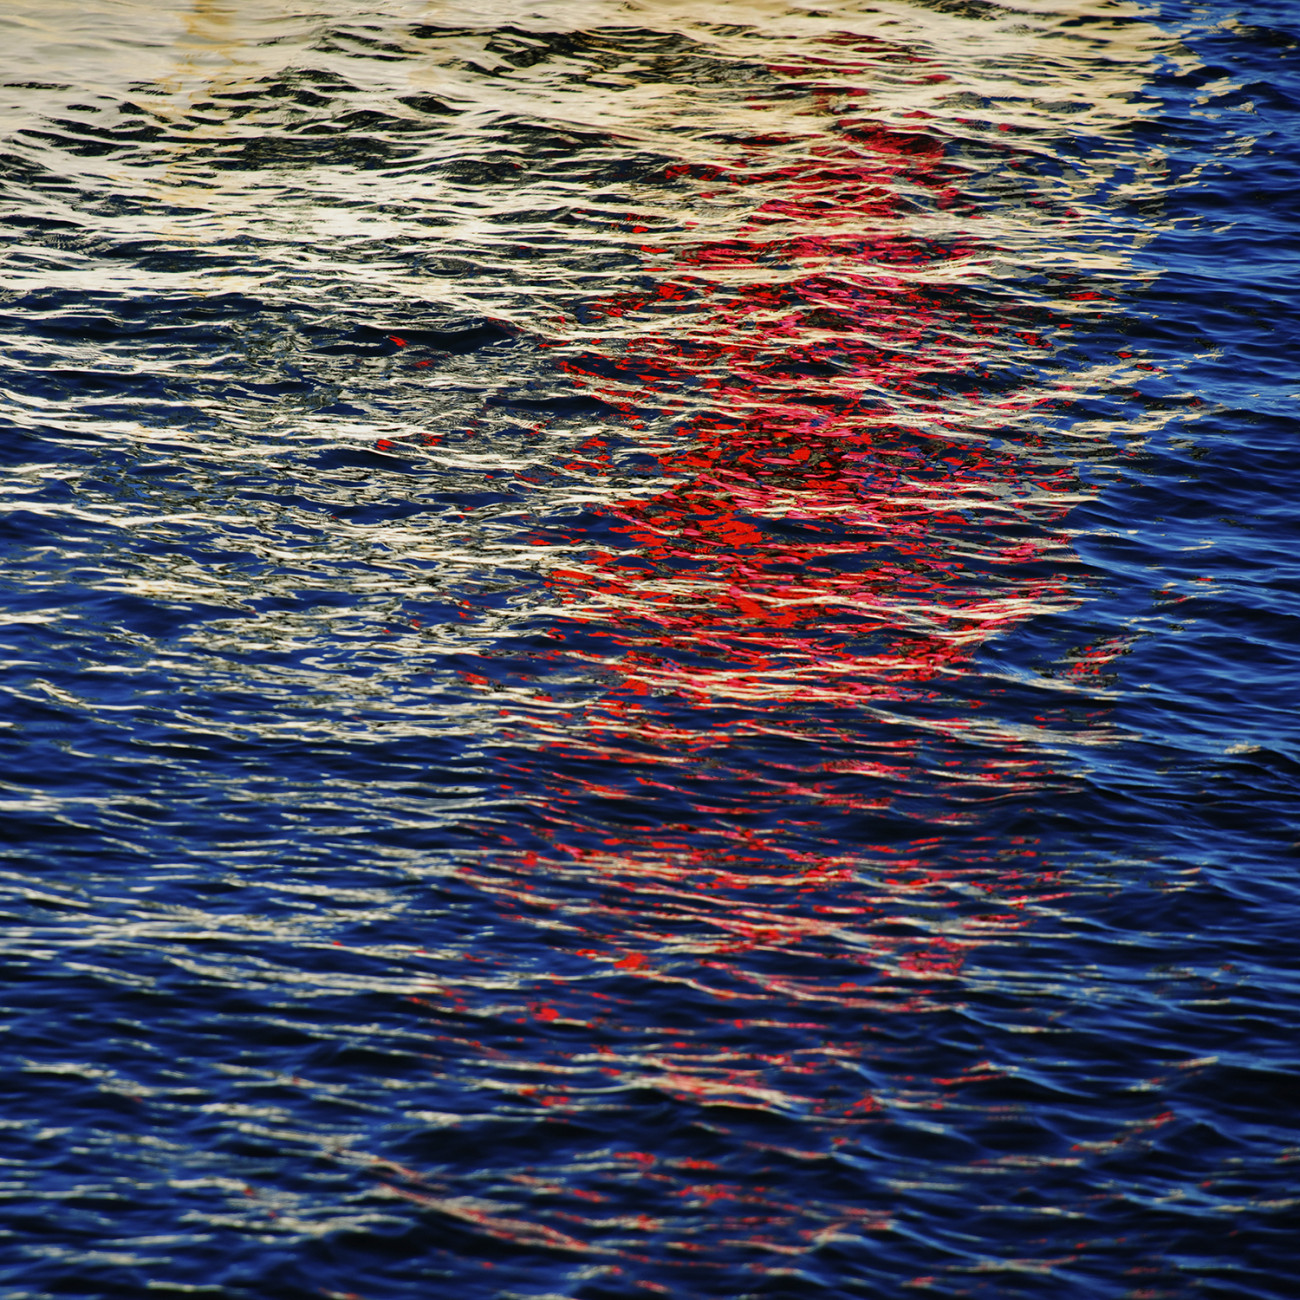 Red White and Blue ocean, Cape Cod, 2009